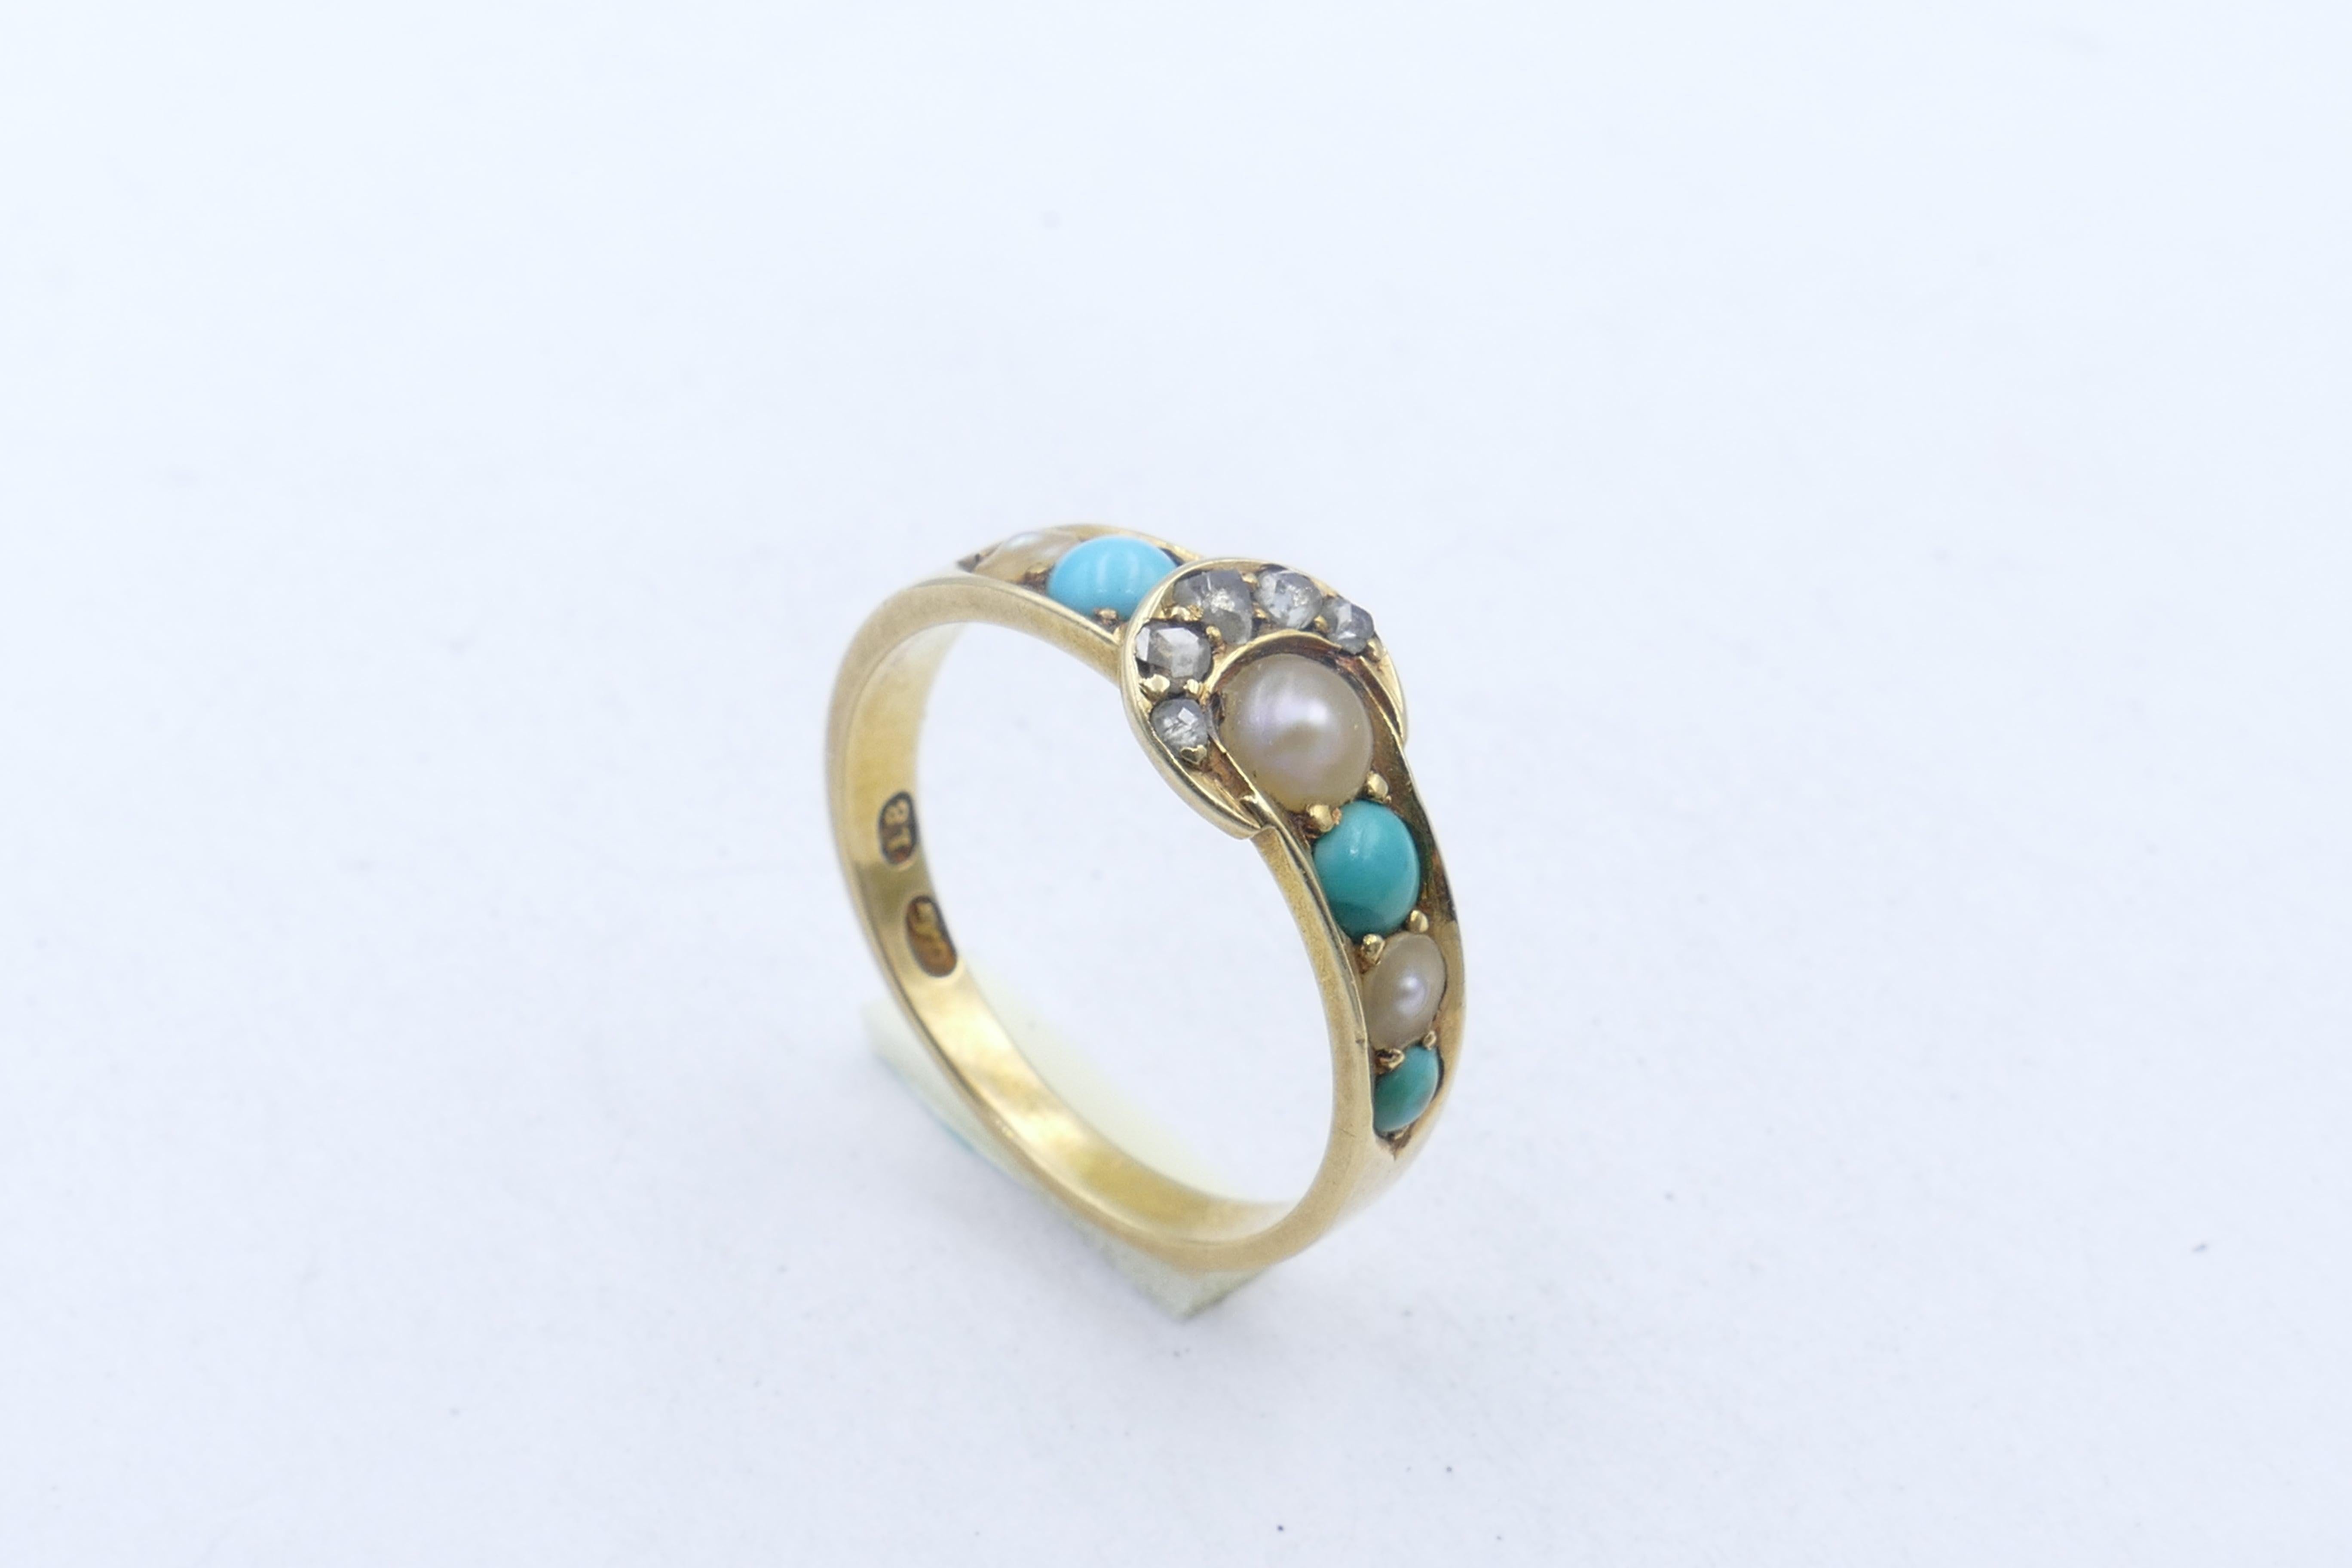 What a fabulous Item of Antiquity this beautifully preserved & very hard to source Buckle Ring is.
5 Rose cut Diamonds are bead set in a horseshoe shape, with 3 Seed Pearls & 3 old Turquoise set along the band.
The Ring is in excellent condition